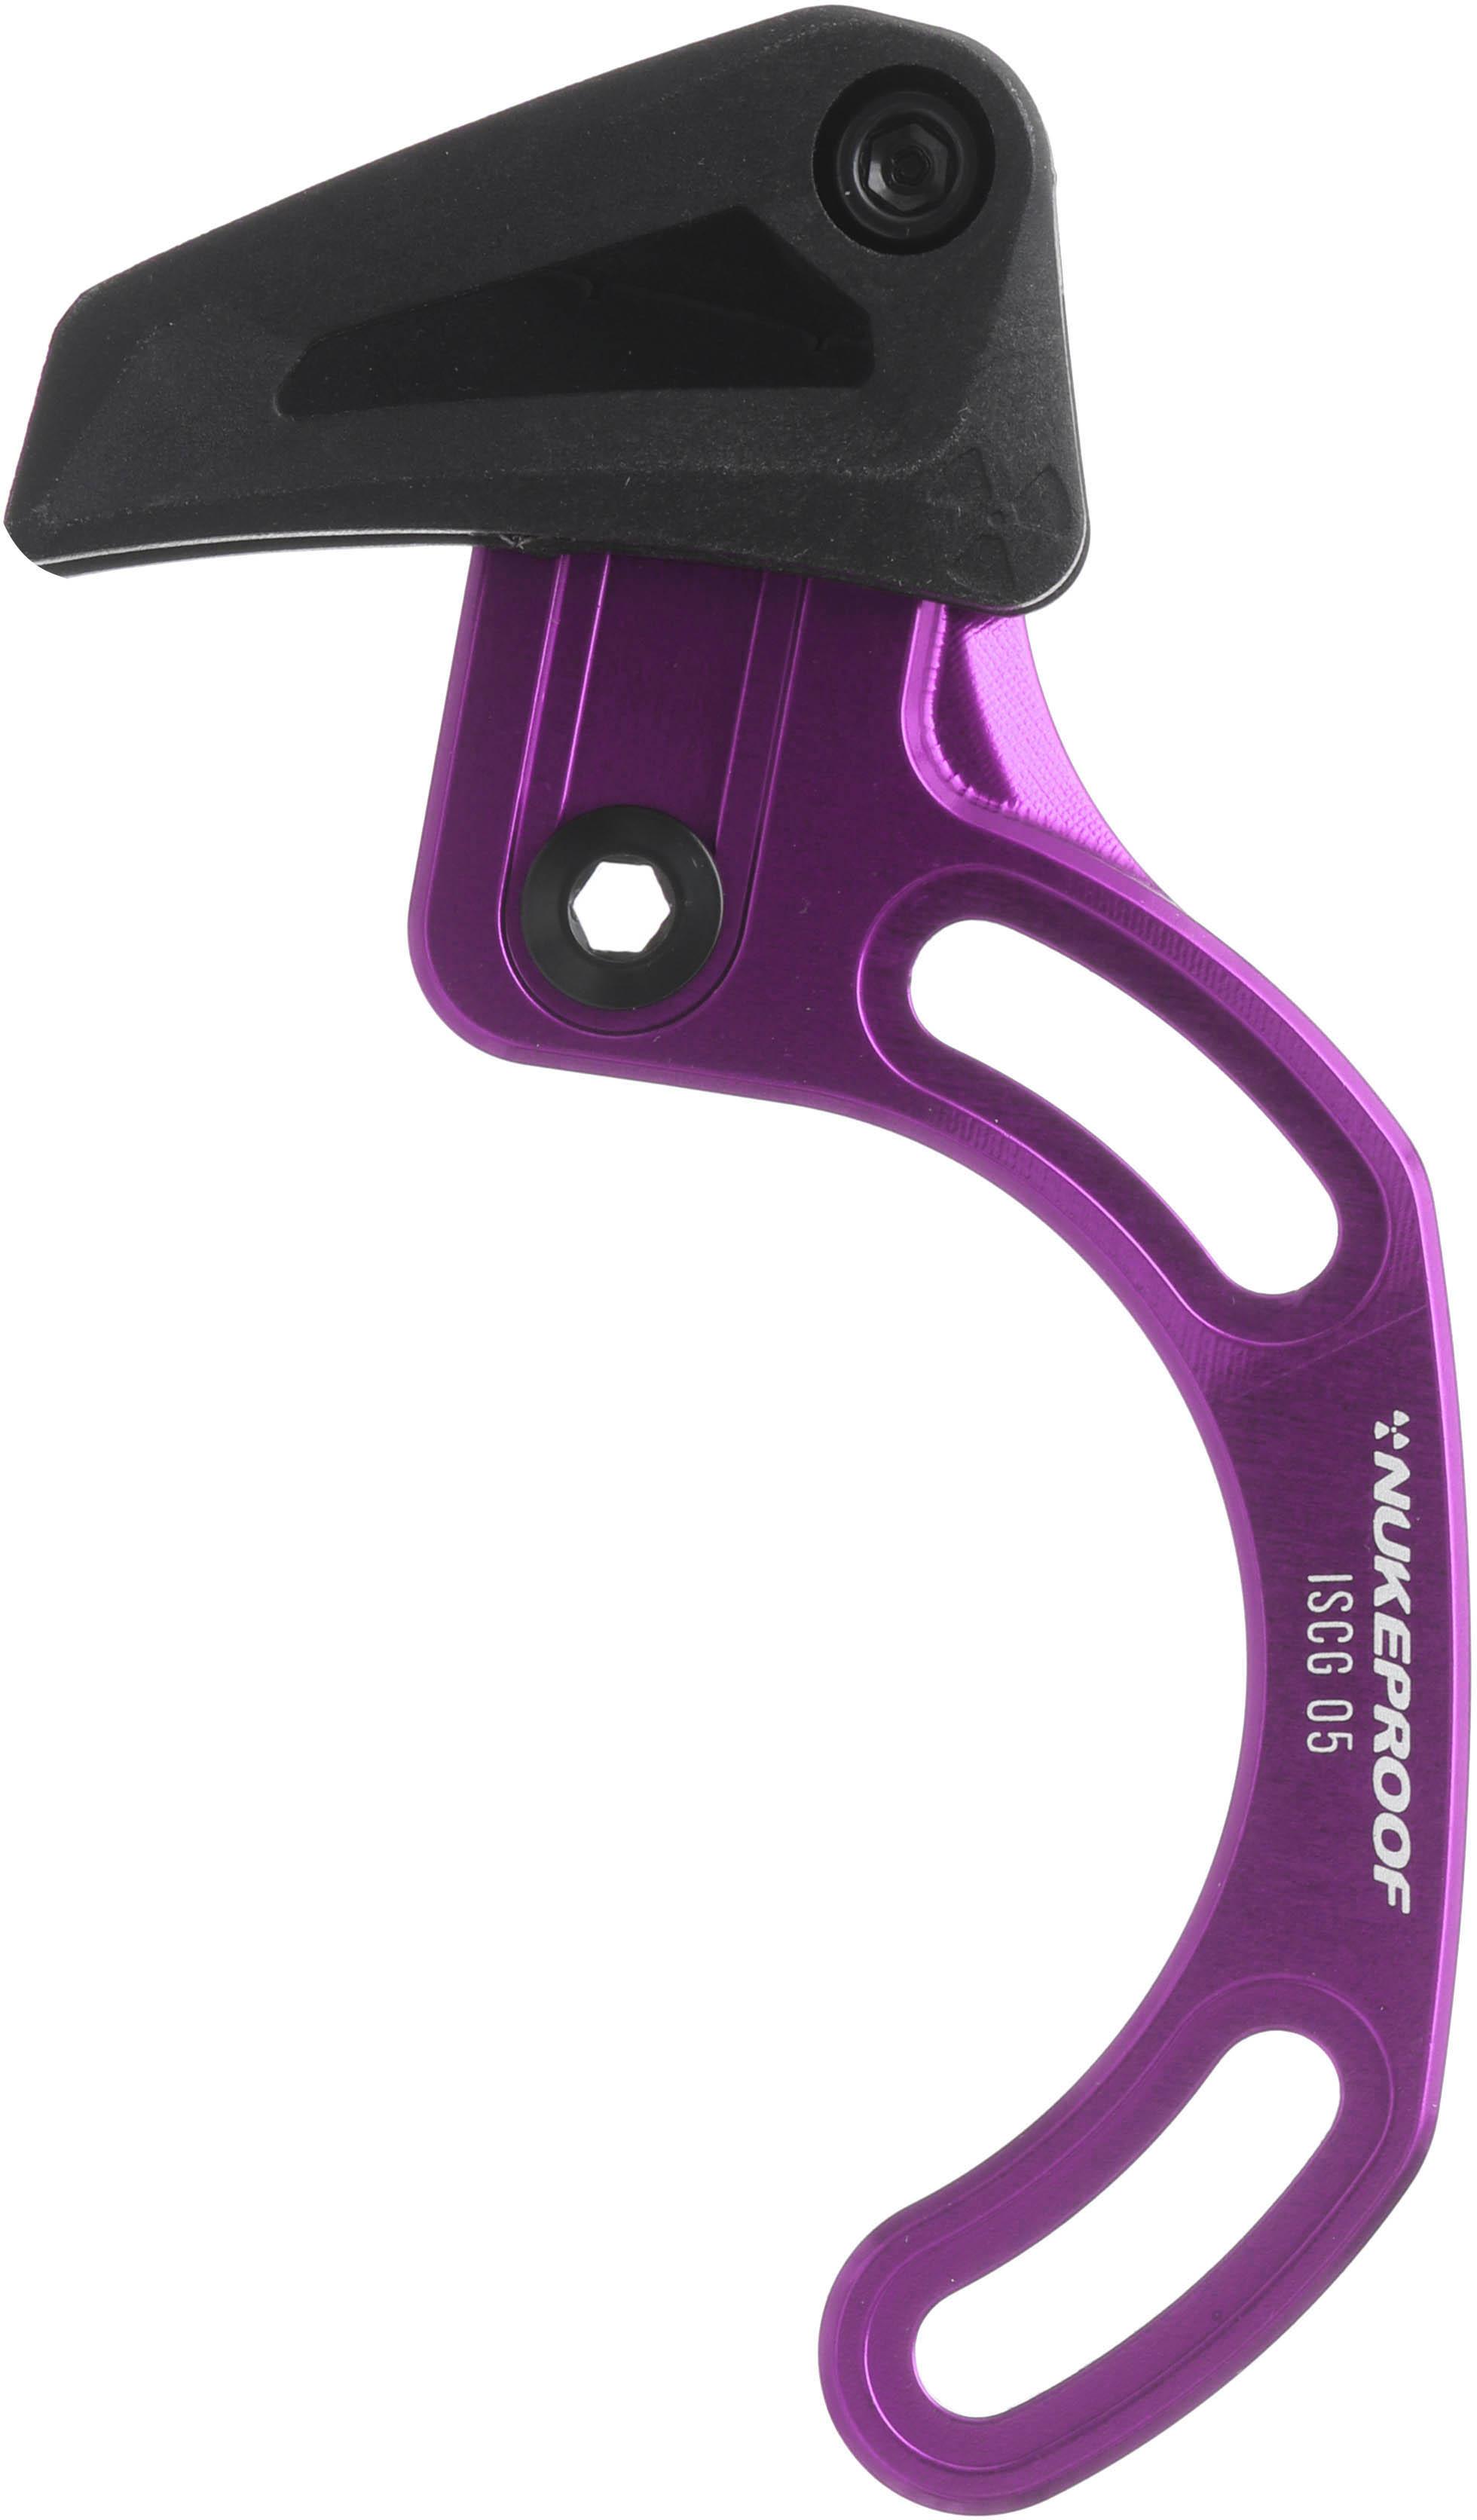 Nukeproof Chain Guide Iscg 05 Top Guide - Purple/black